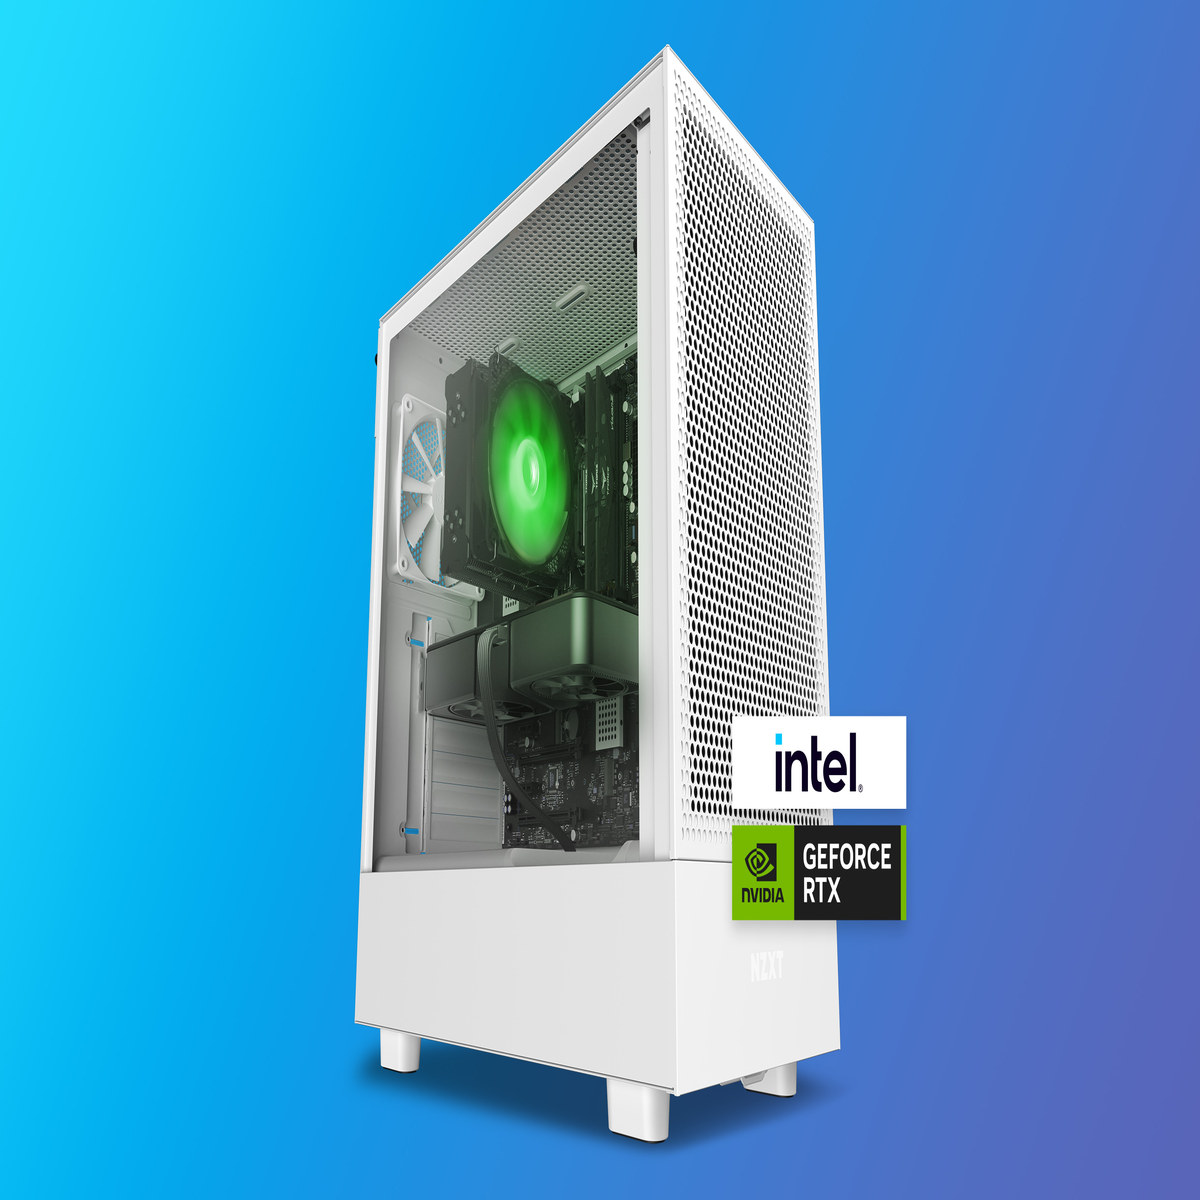 Get on latest gen with this RTX 4060 Ti gaming PC  coupon